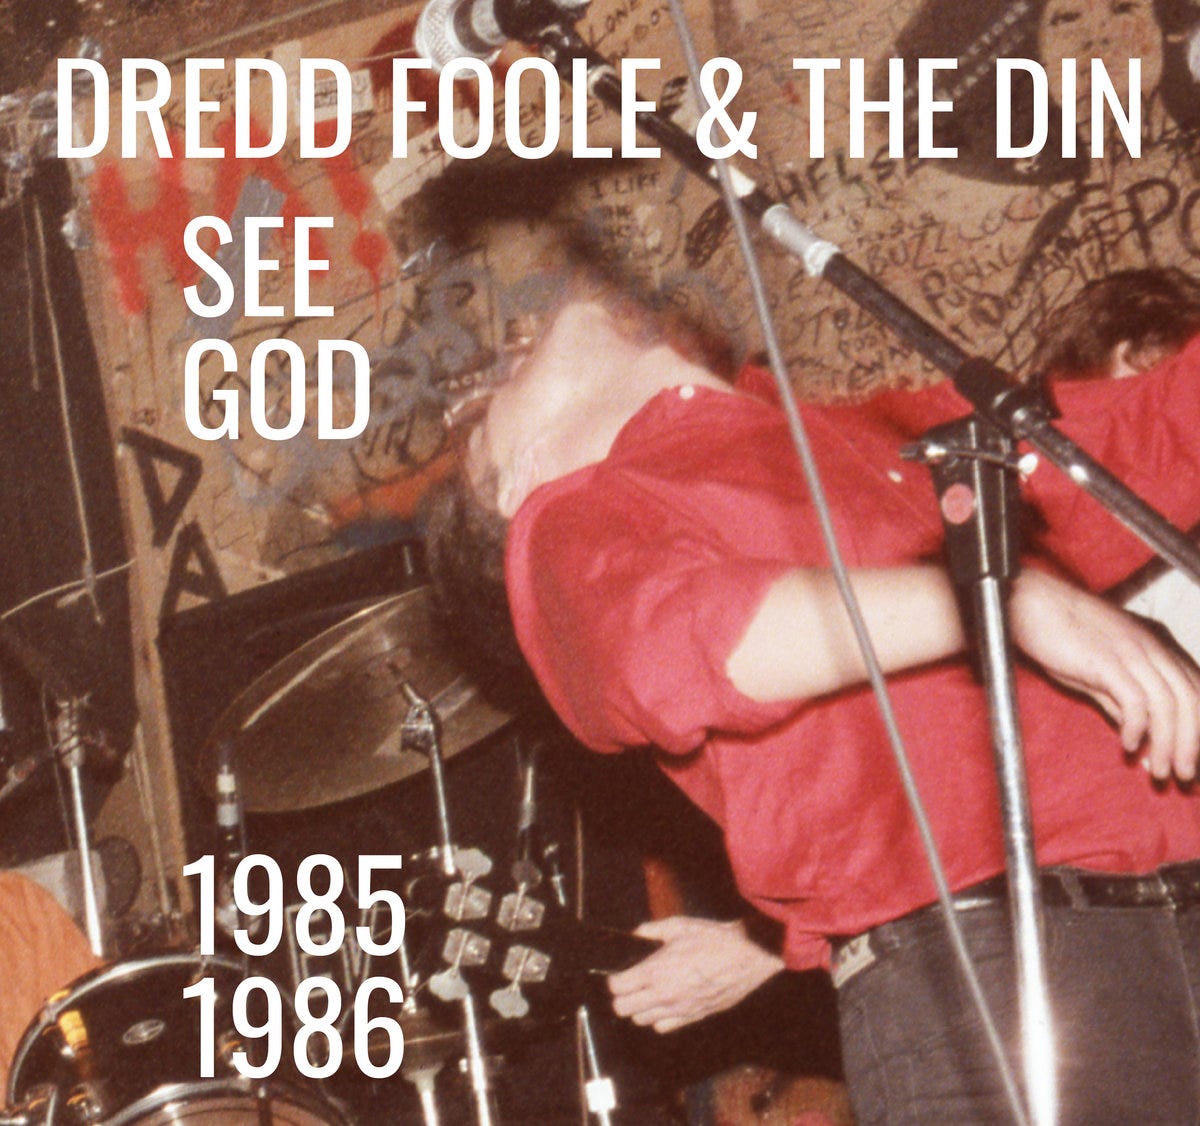 Dredd Foole & The Din - See God (1985-1986) cover